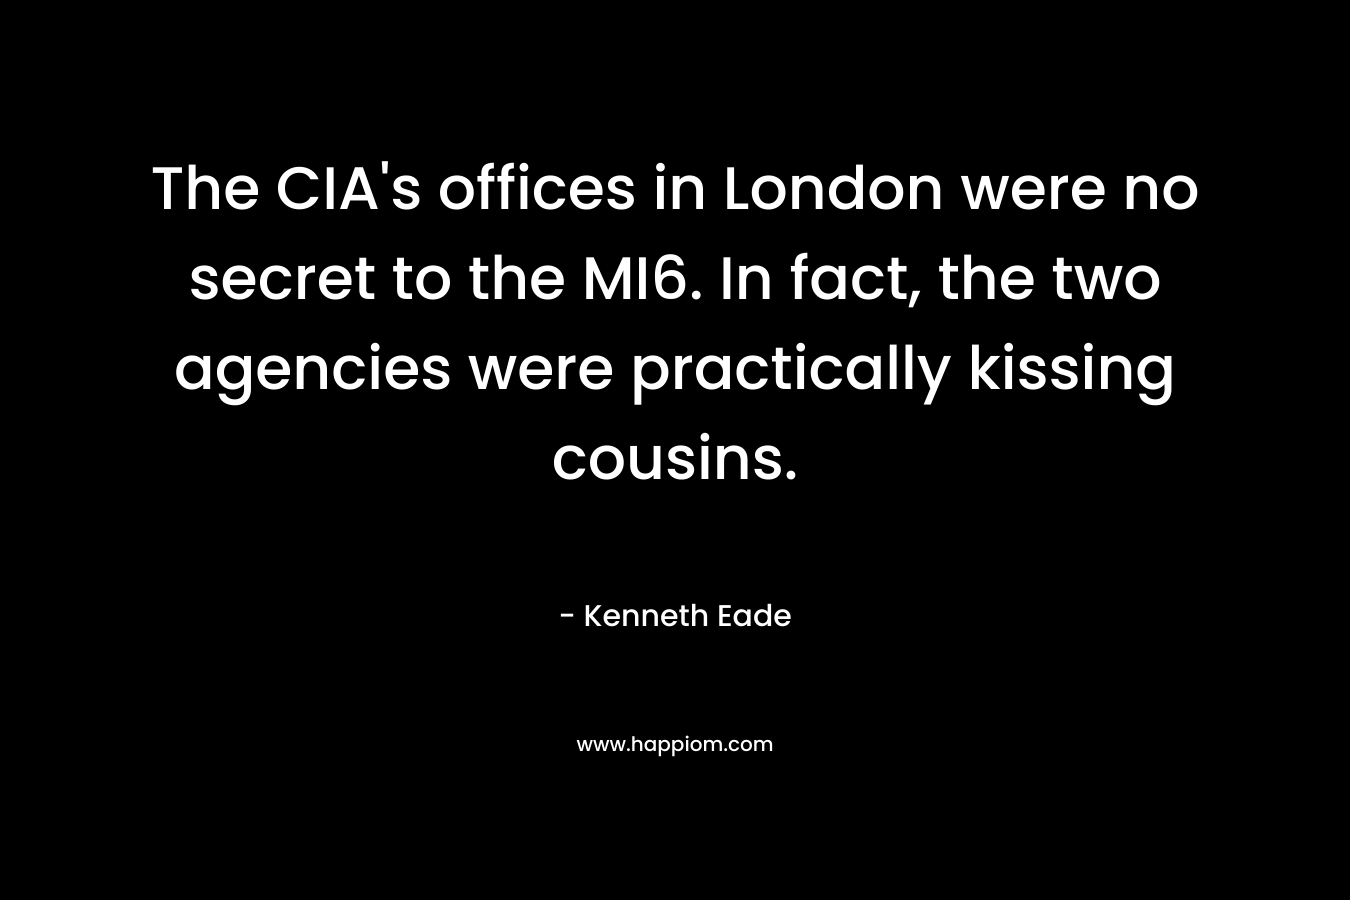 The CIA’s offices in London were no secret to the MI6. In fact, the two agencies were practically kissing cousins. – Kenneth Eade